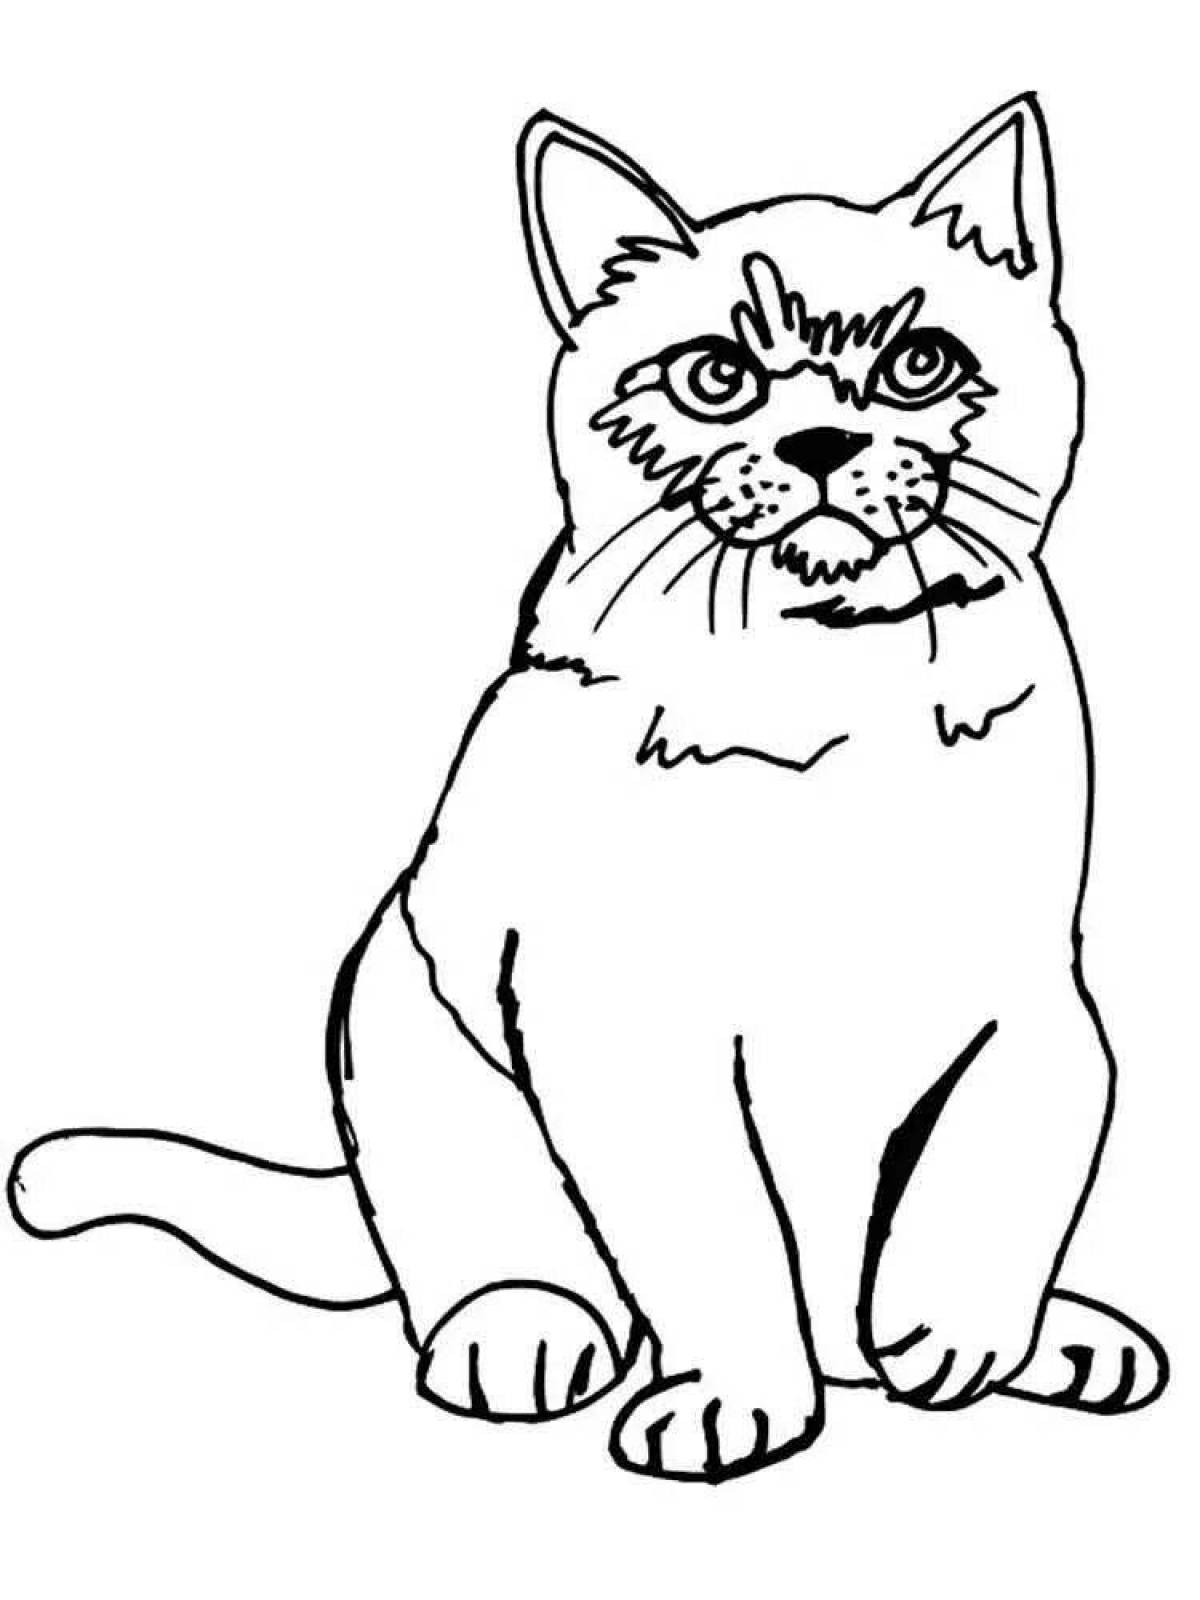 Exotic black cat coloring page